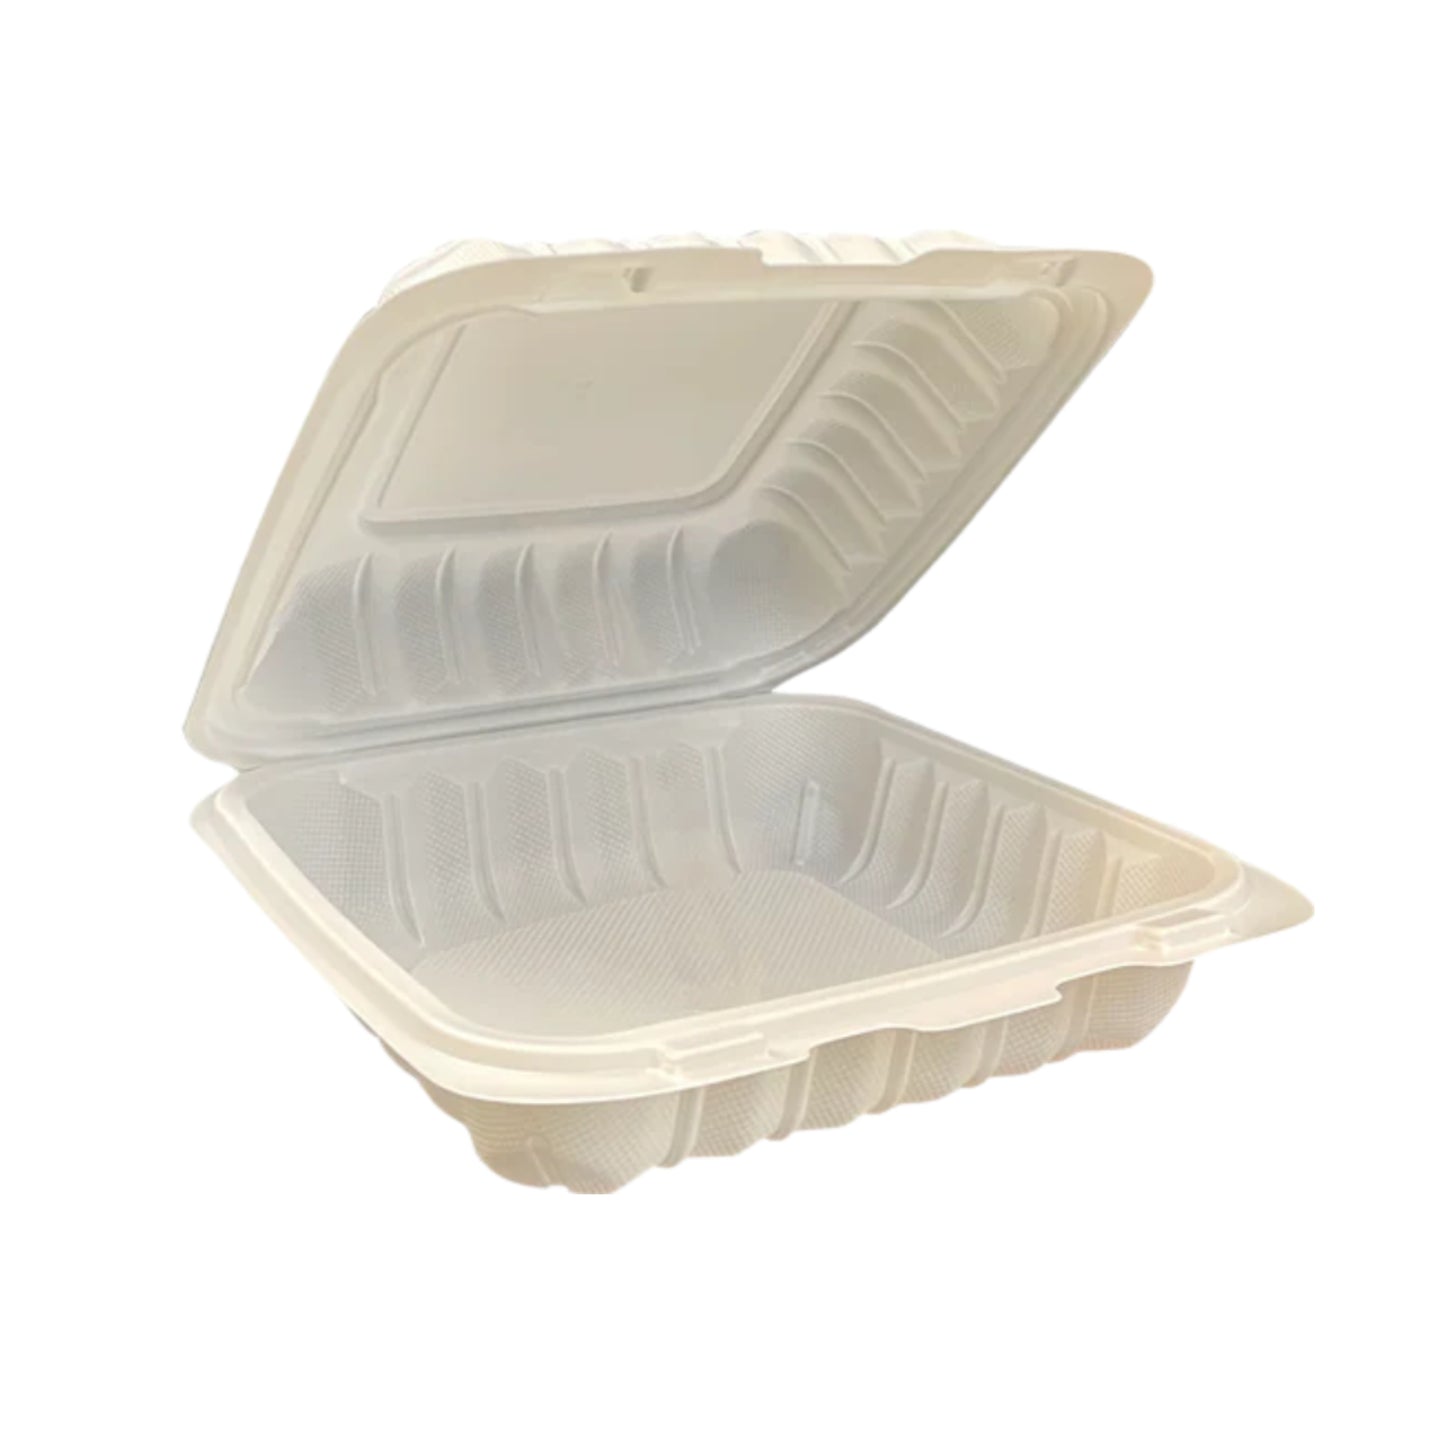 KIS-PP701G | 7.5x7.5x2.5 inches, 1-Compartment, PP Clamshell Food Container; $0.219/pc